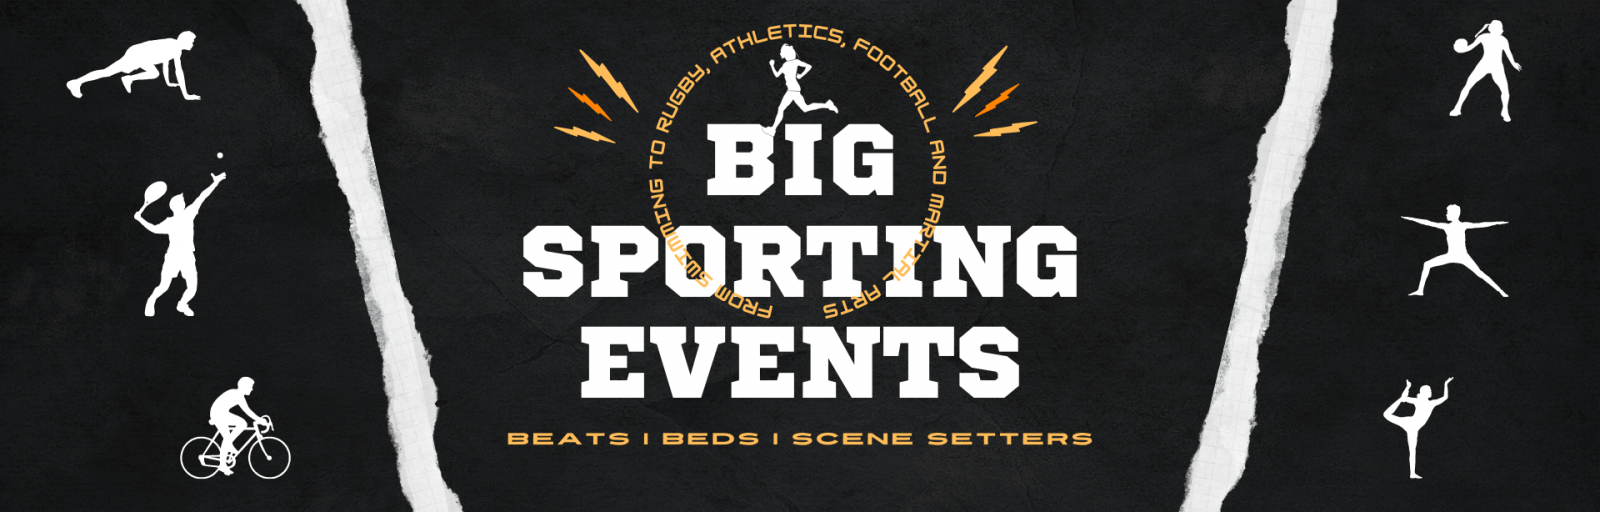 Big Sporting Events Collection